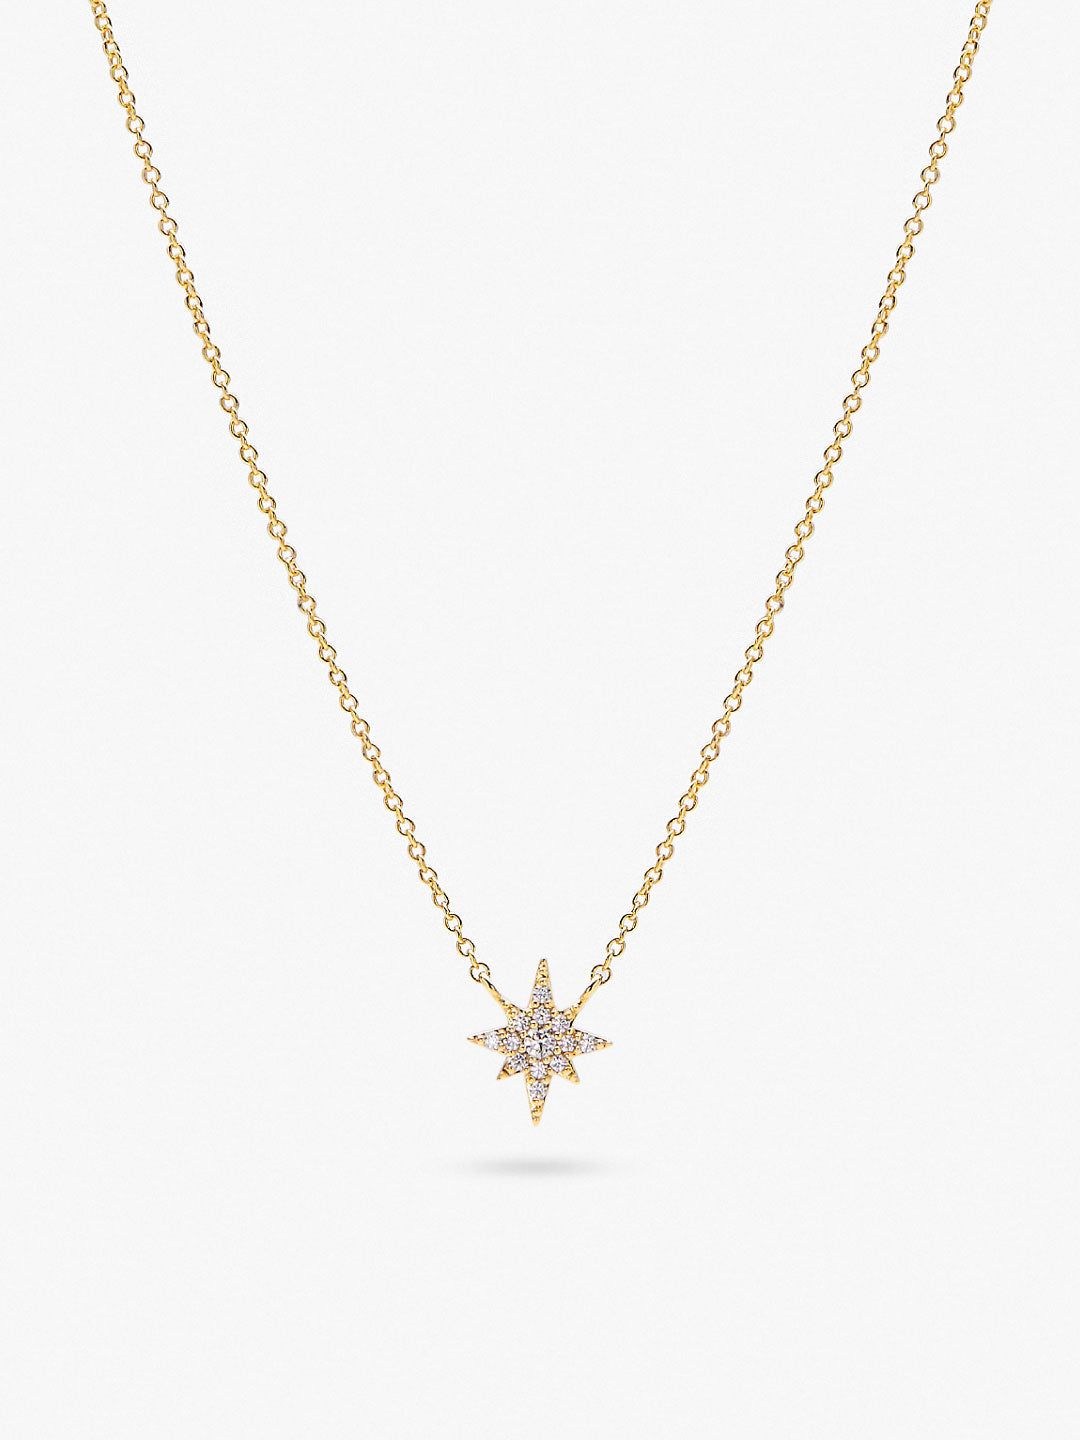 Ana Luisa Jewelry Necklaces Light Chains Star Necklace River Gold